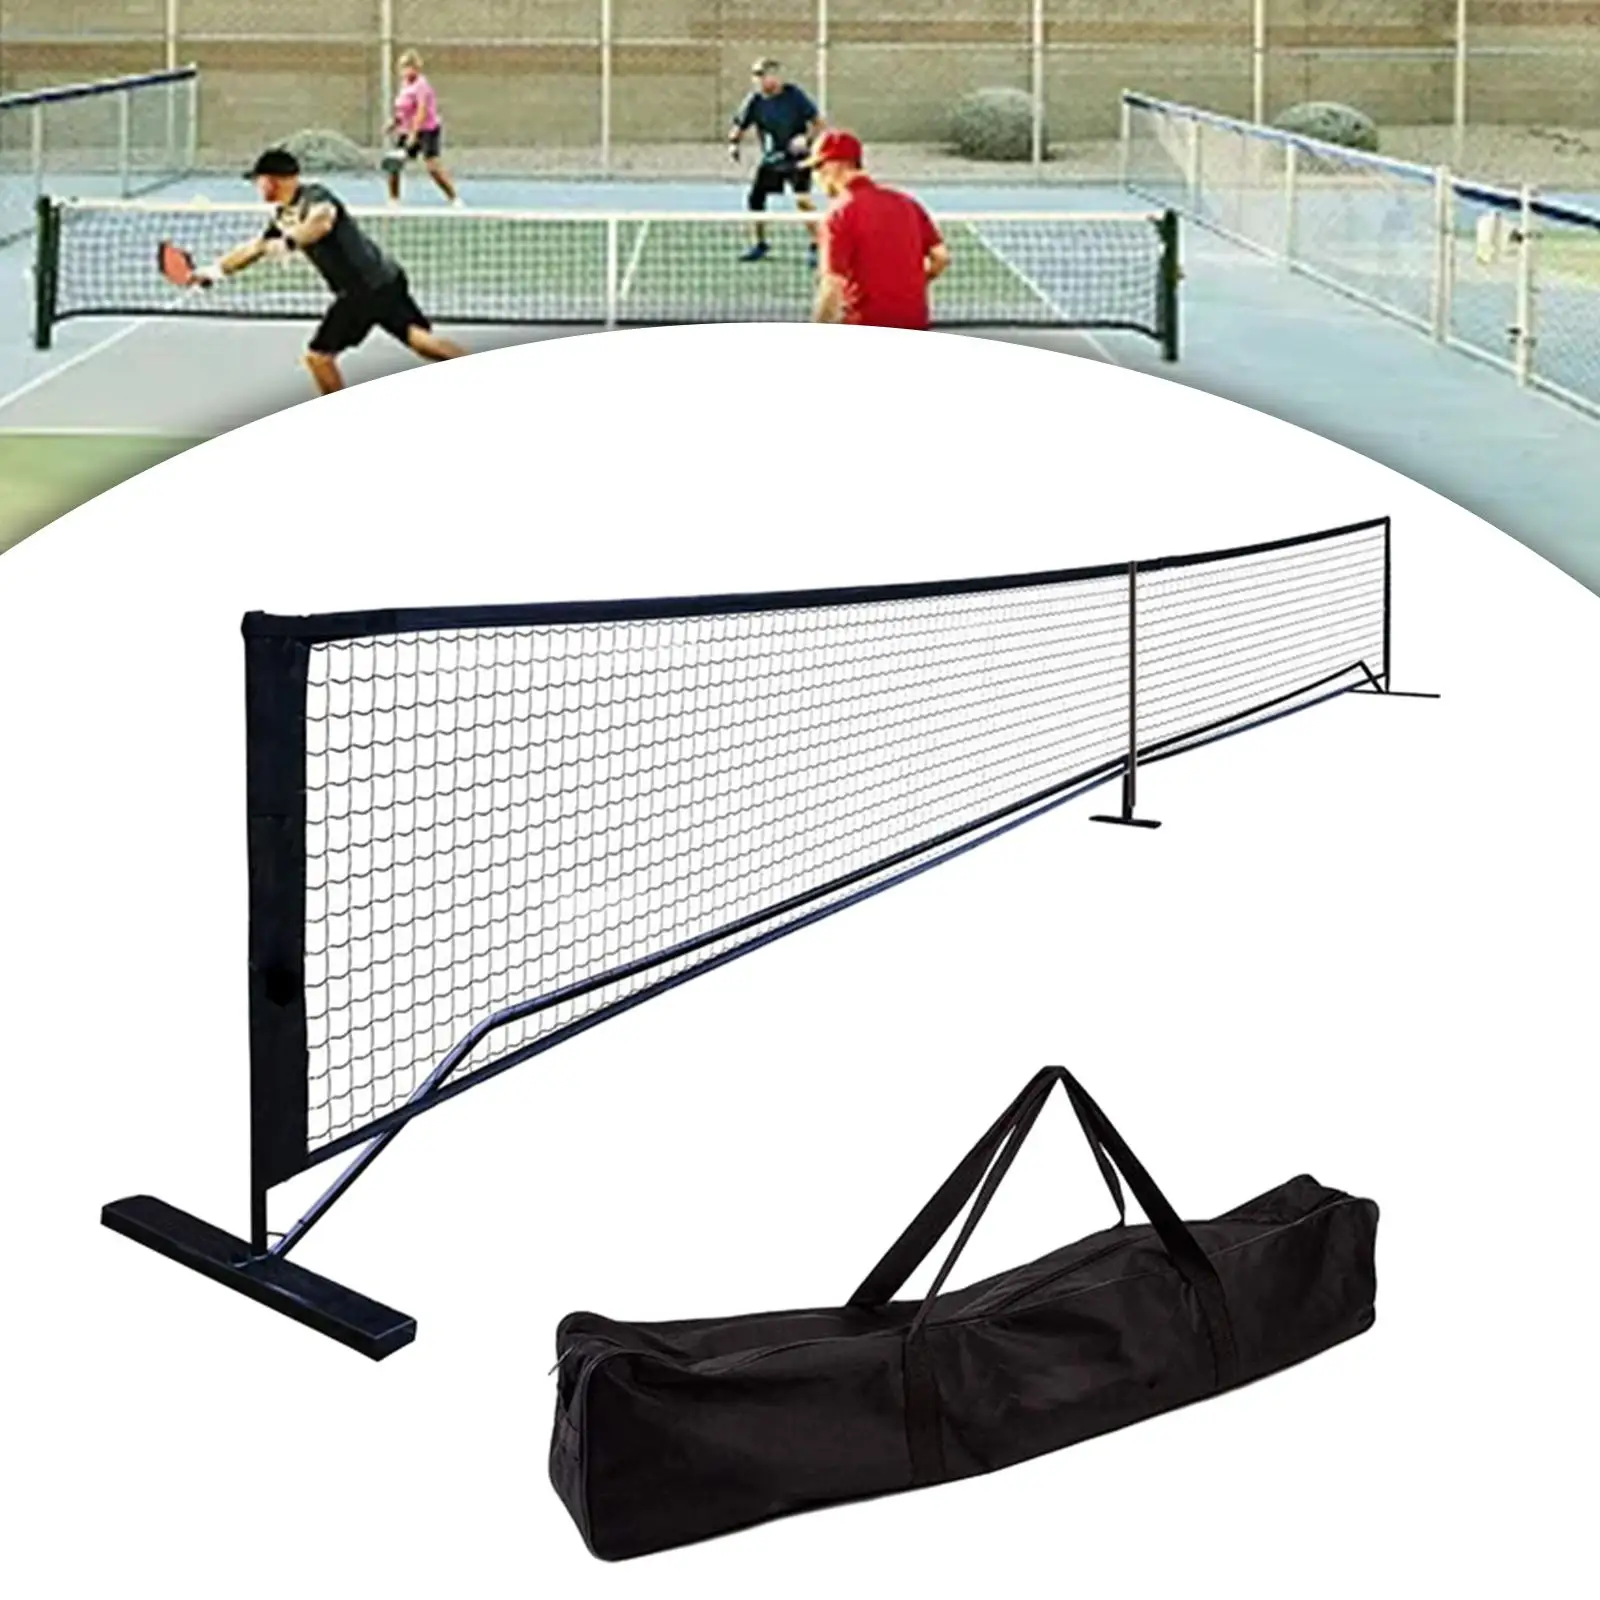 Portable Pickleball Net Set Black 670cmx91cm Backyards Beginners Game Iron Frame with Storage Bag Professionals Driveway Matches